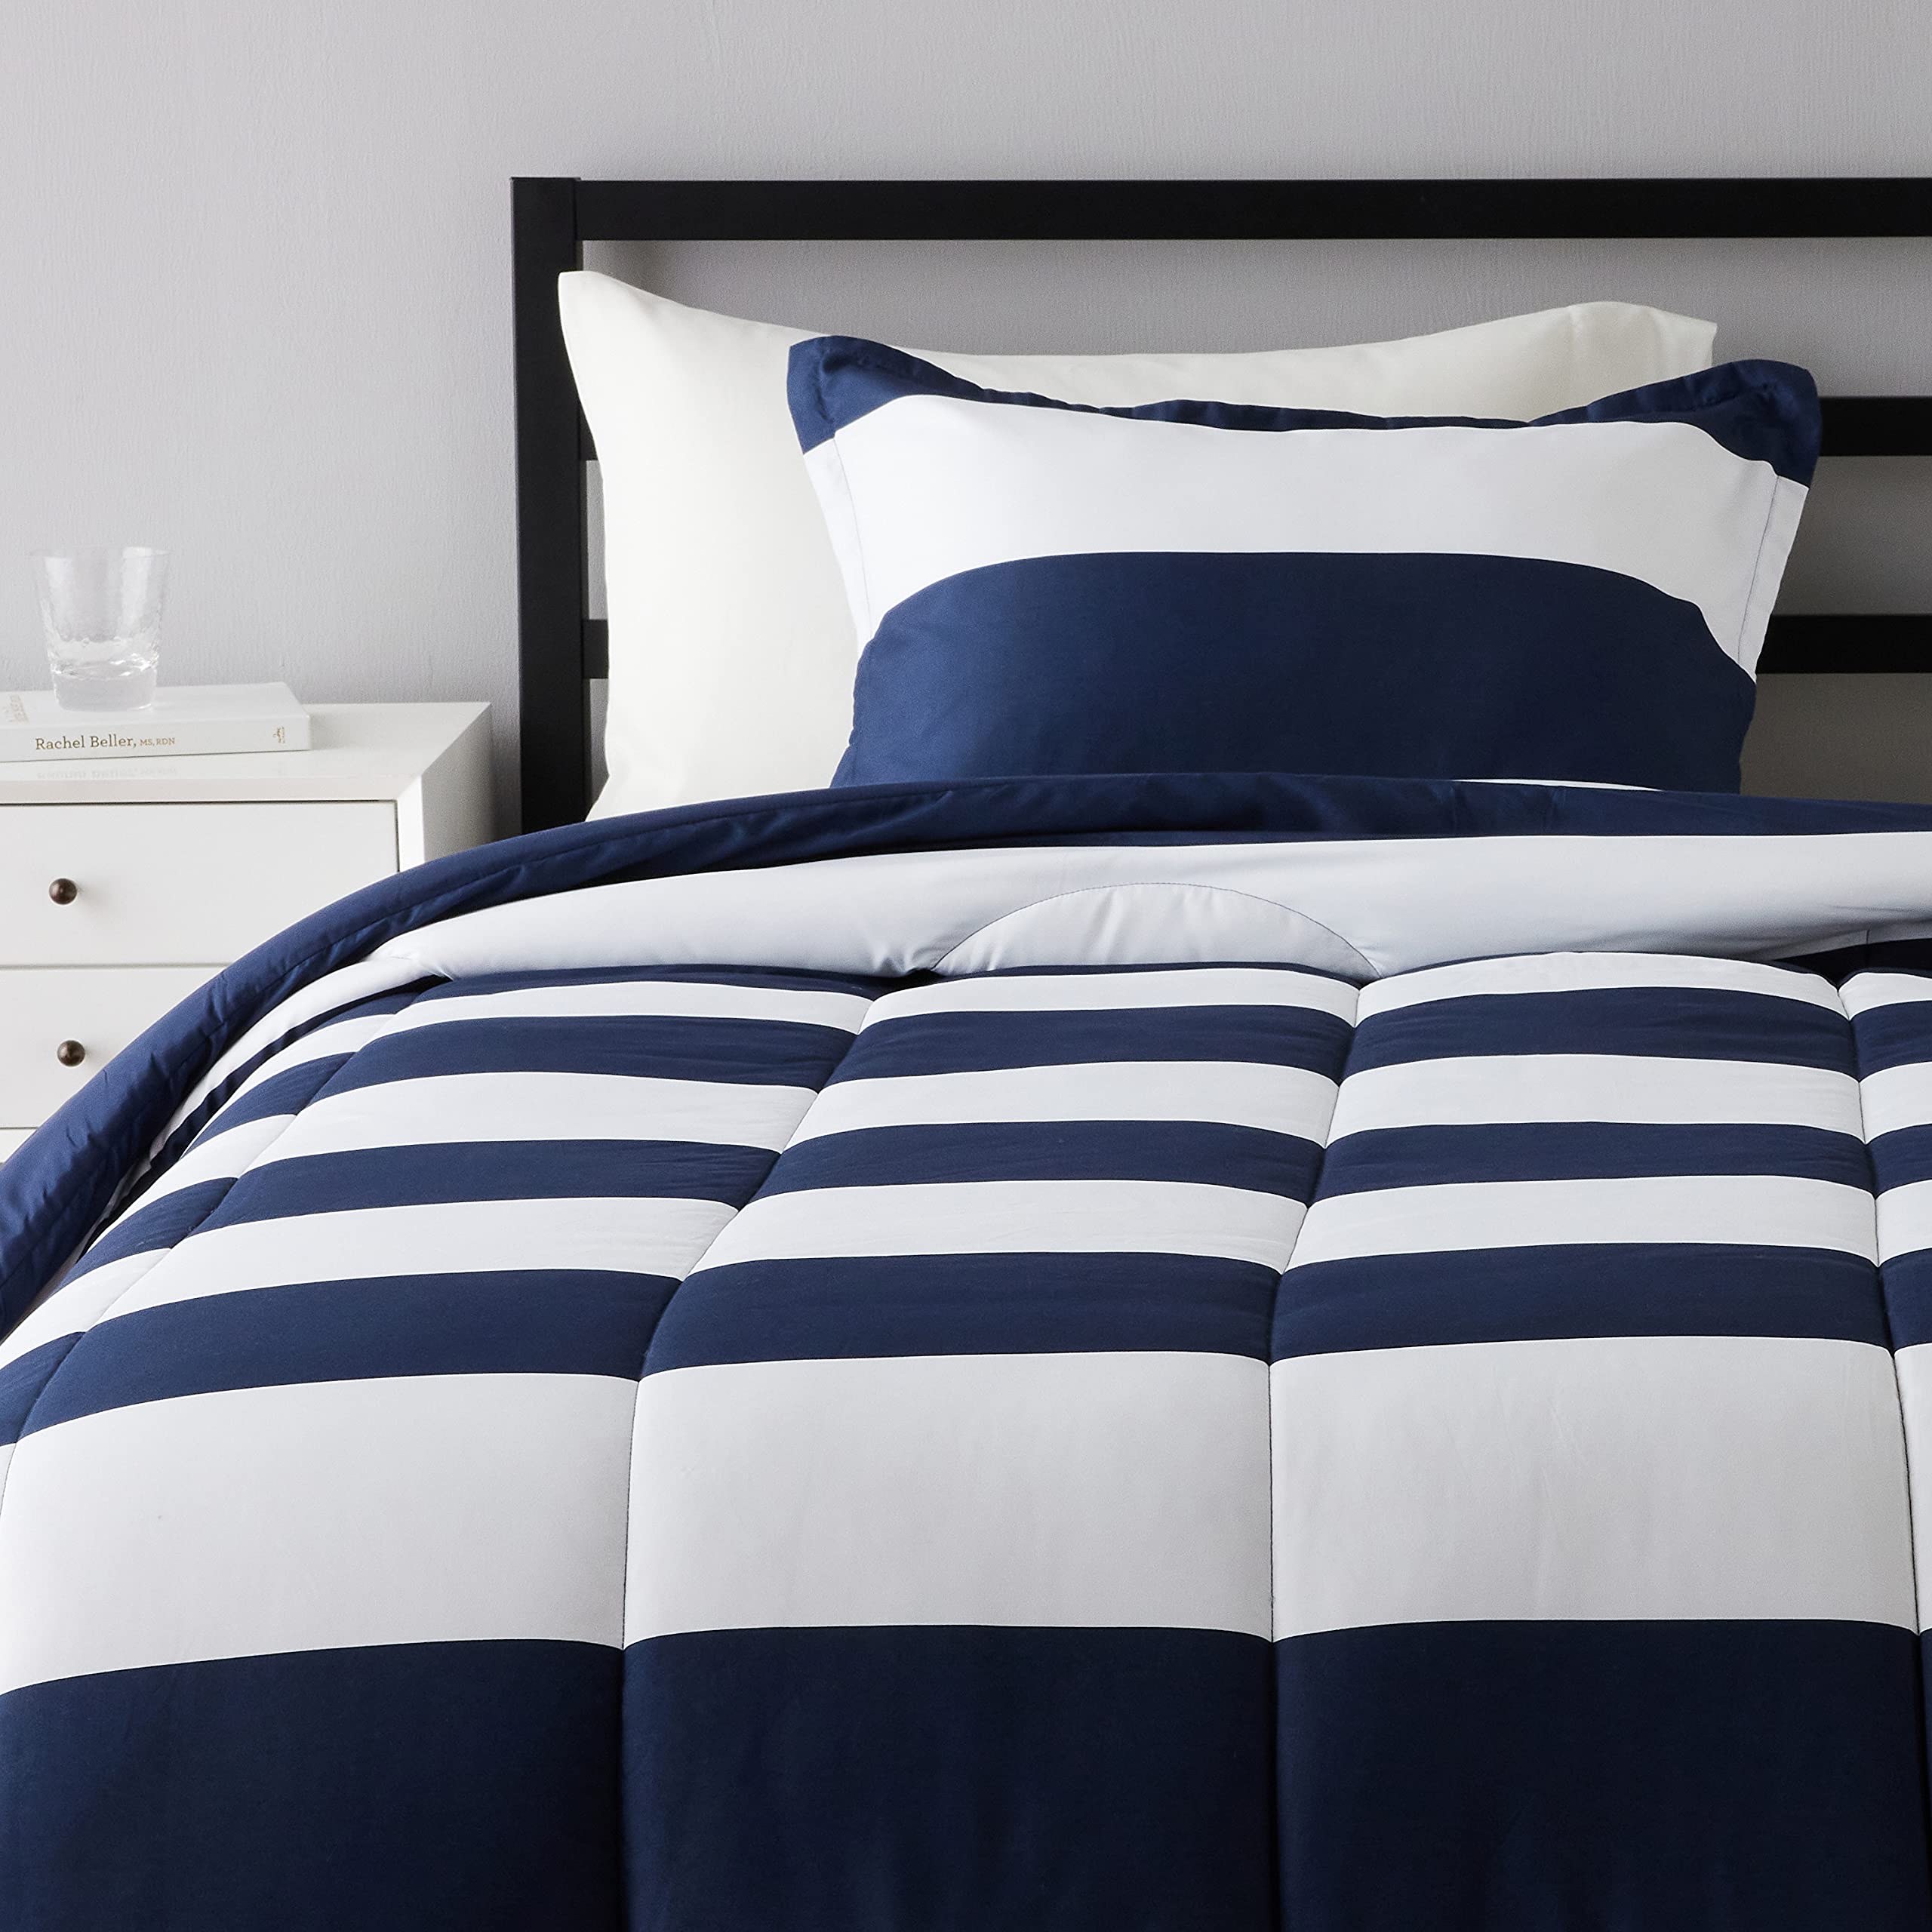 Book Cover Amazon Basics Reversible Comforter Set, Twin / Twin XL, Navy Rugby Stripes, Microfiber, Ultra-Soft Navy Rugby Stripes Twin/Twin XL Comforter Set